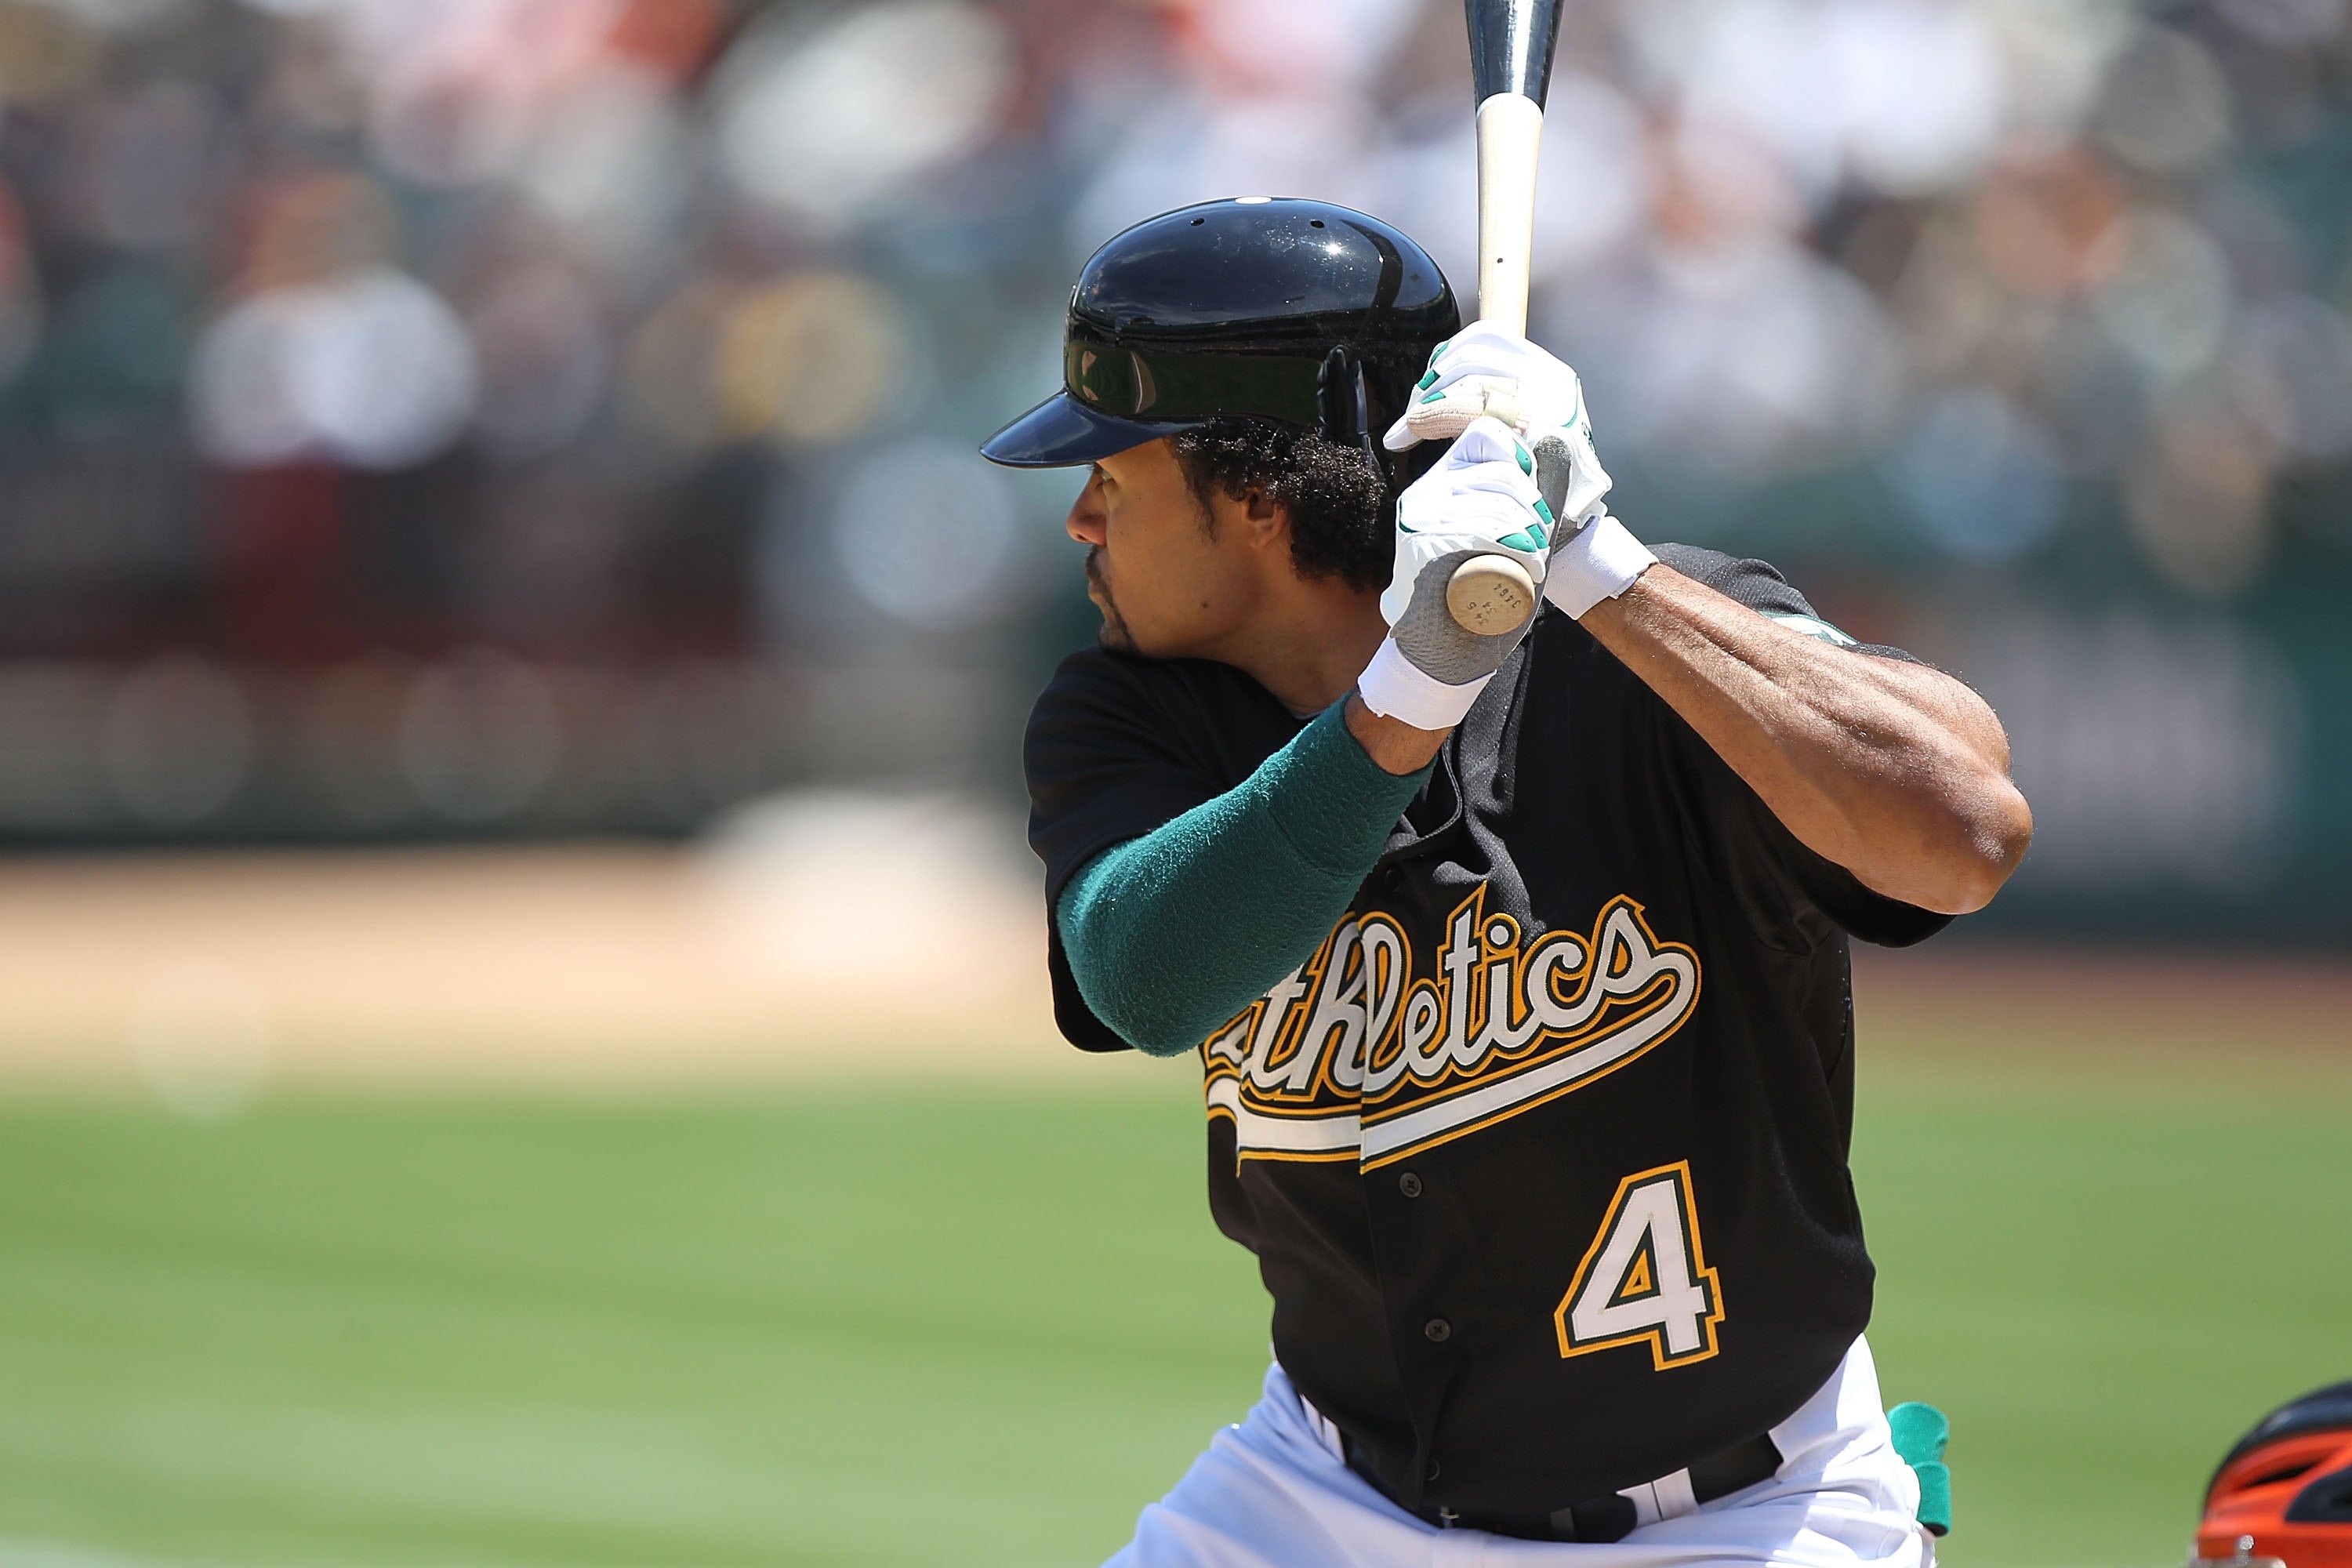 Come see how Coco Crisp is living